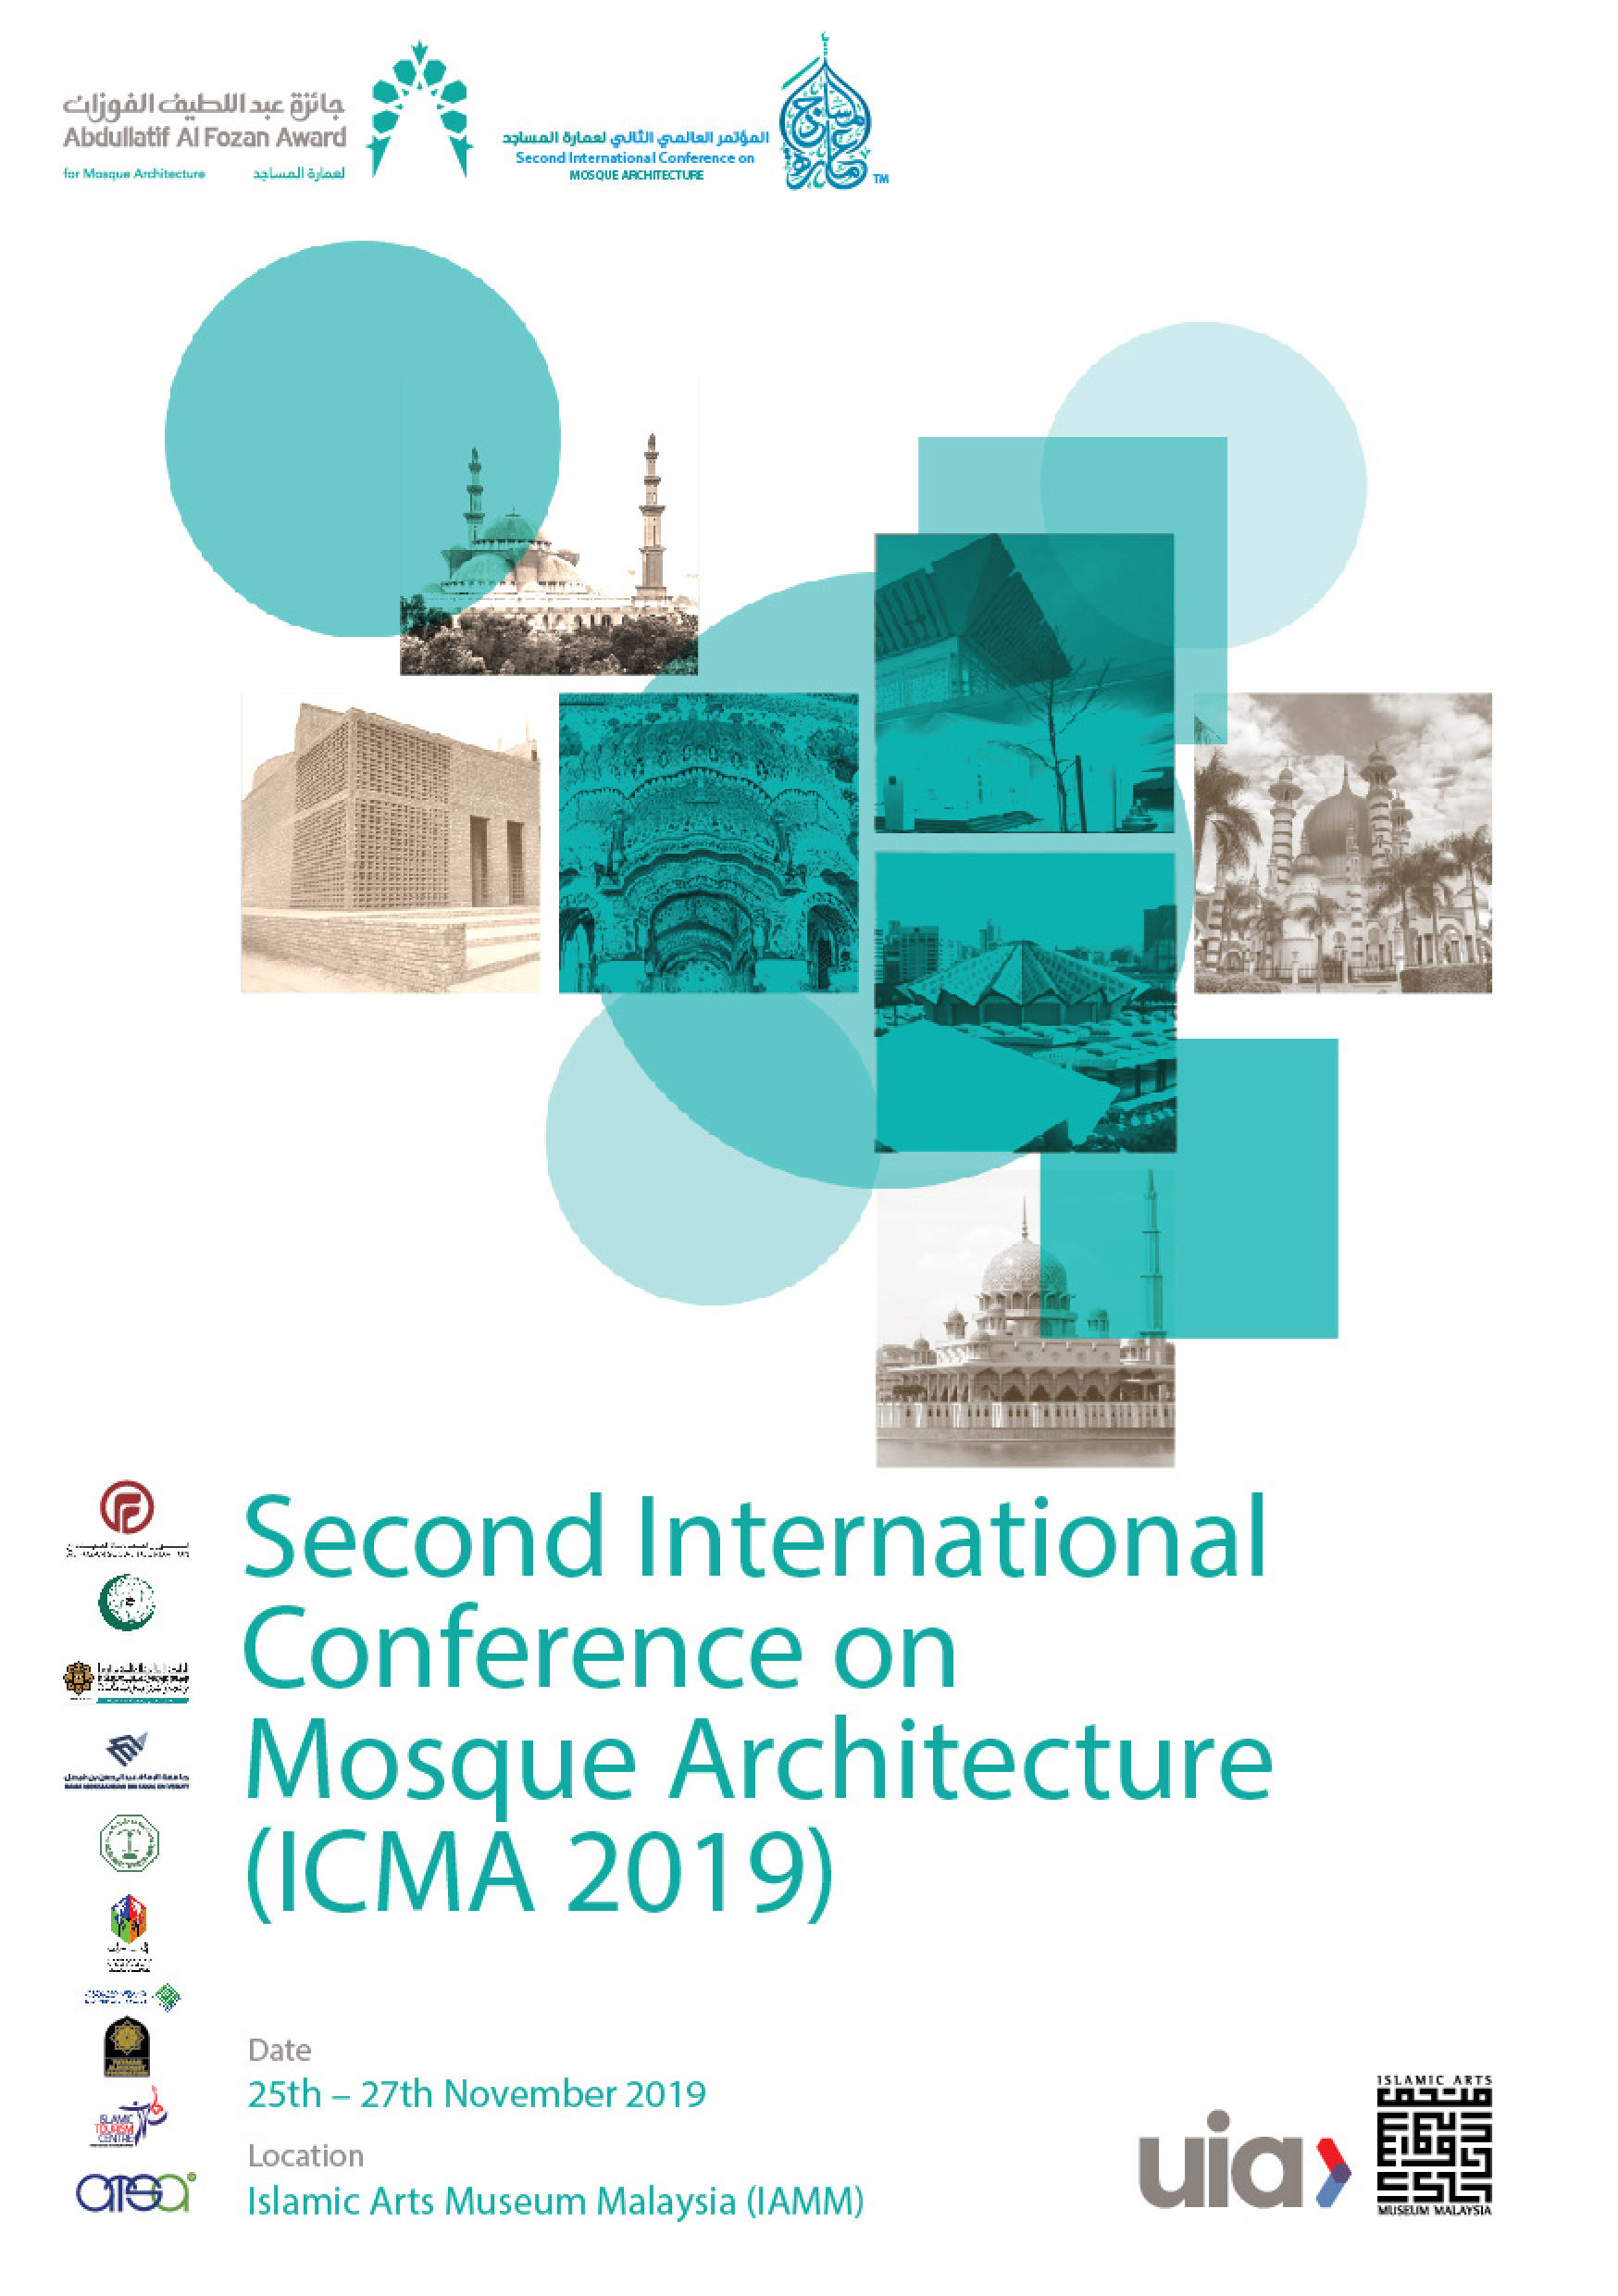 The 2nd International Conference on Mosque Architecture (ICMA 2019)